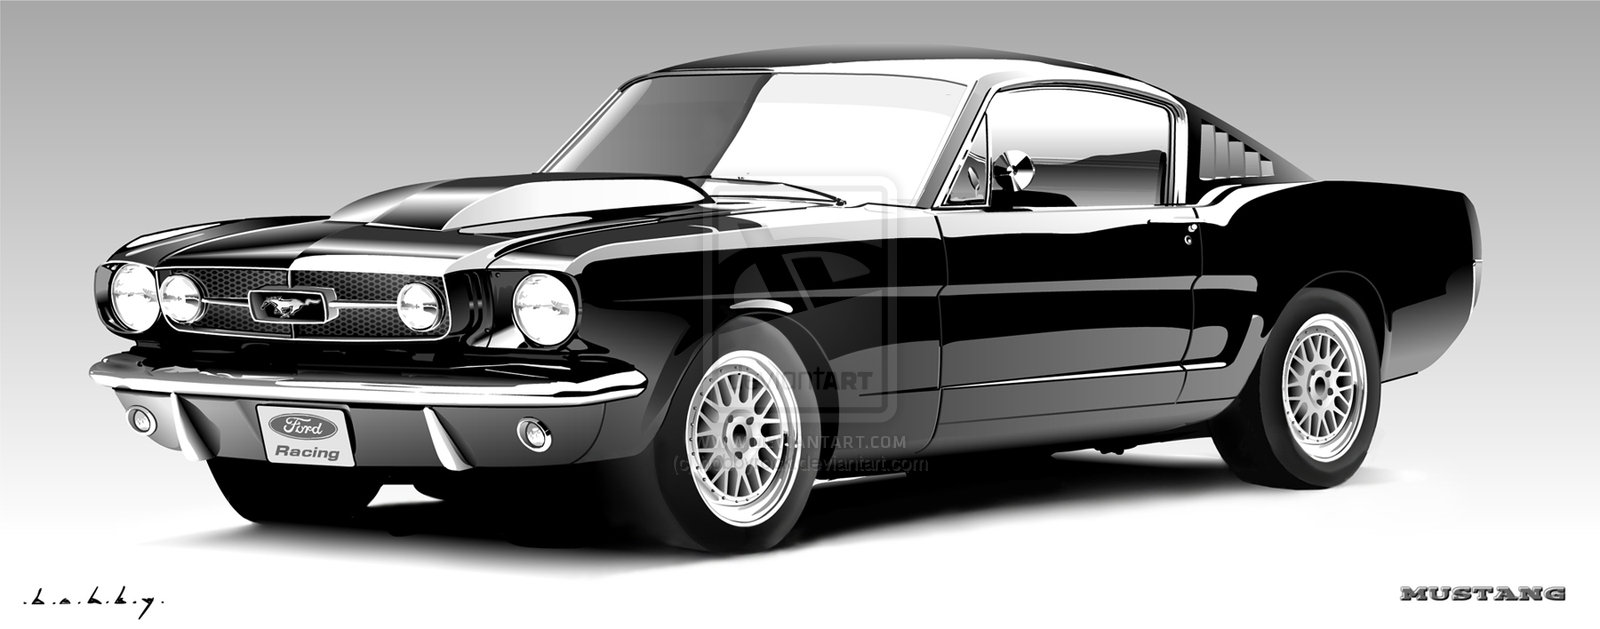 Ford Mustang Vector